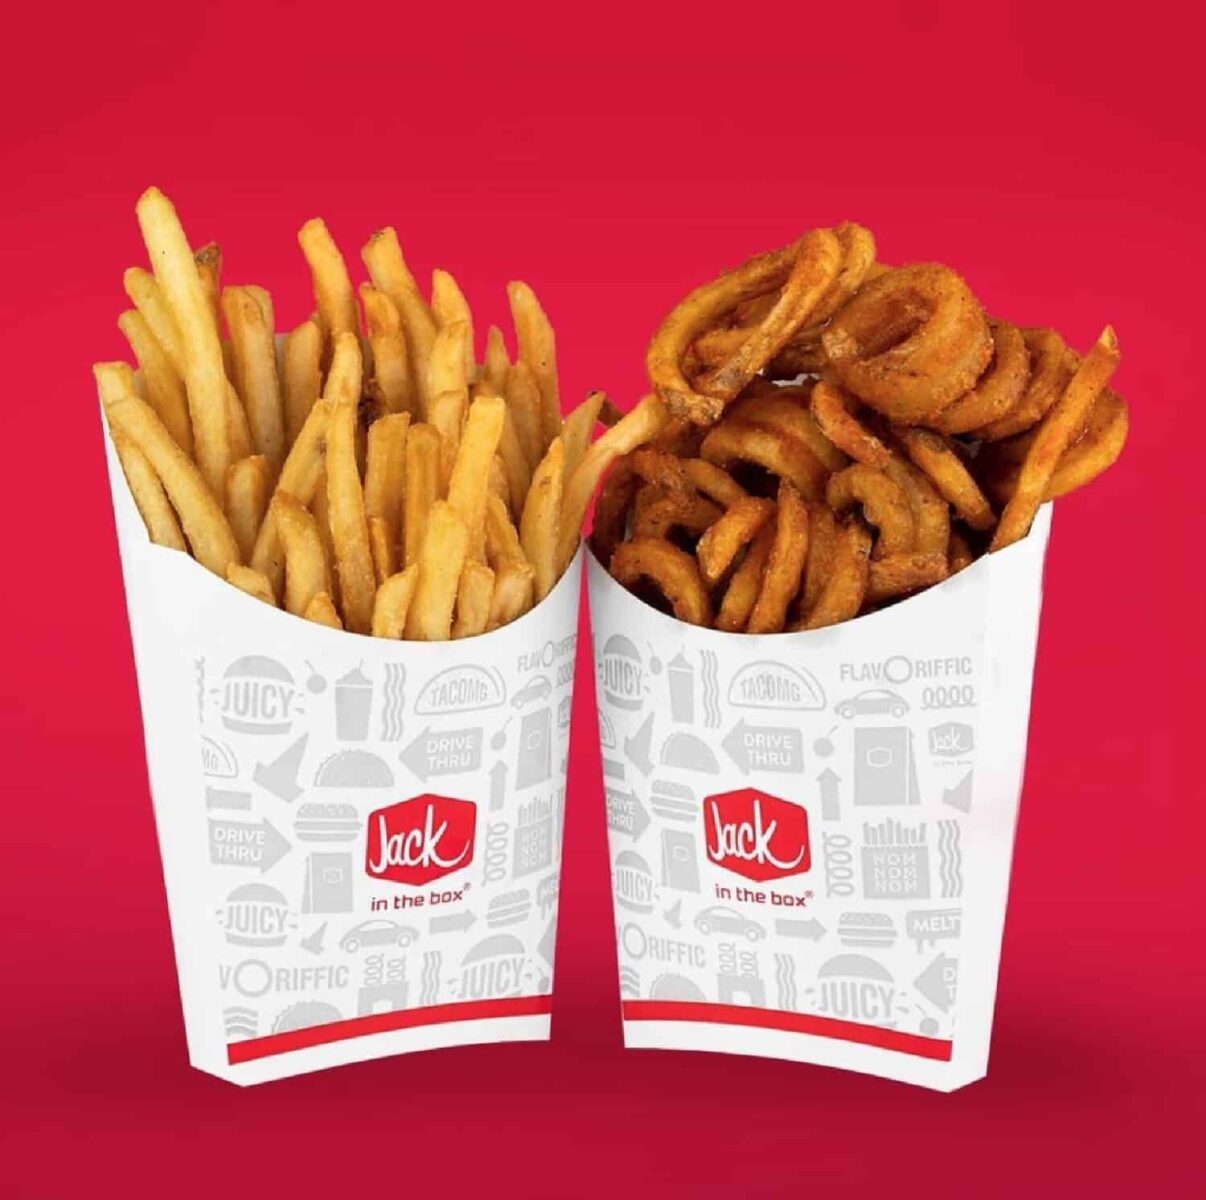 Jack in the Box Regular and Seasoned Curly Fries